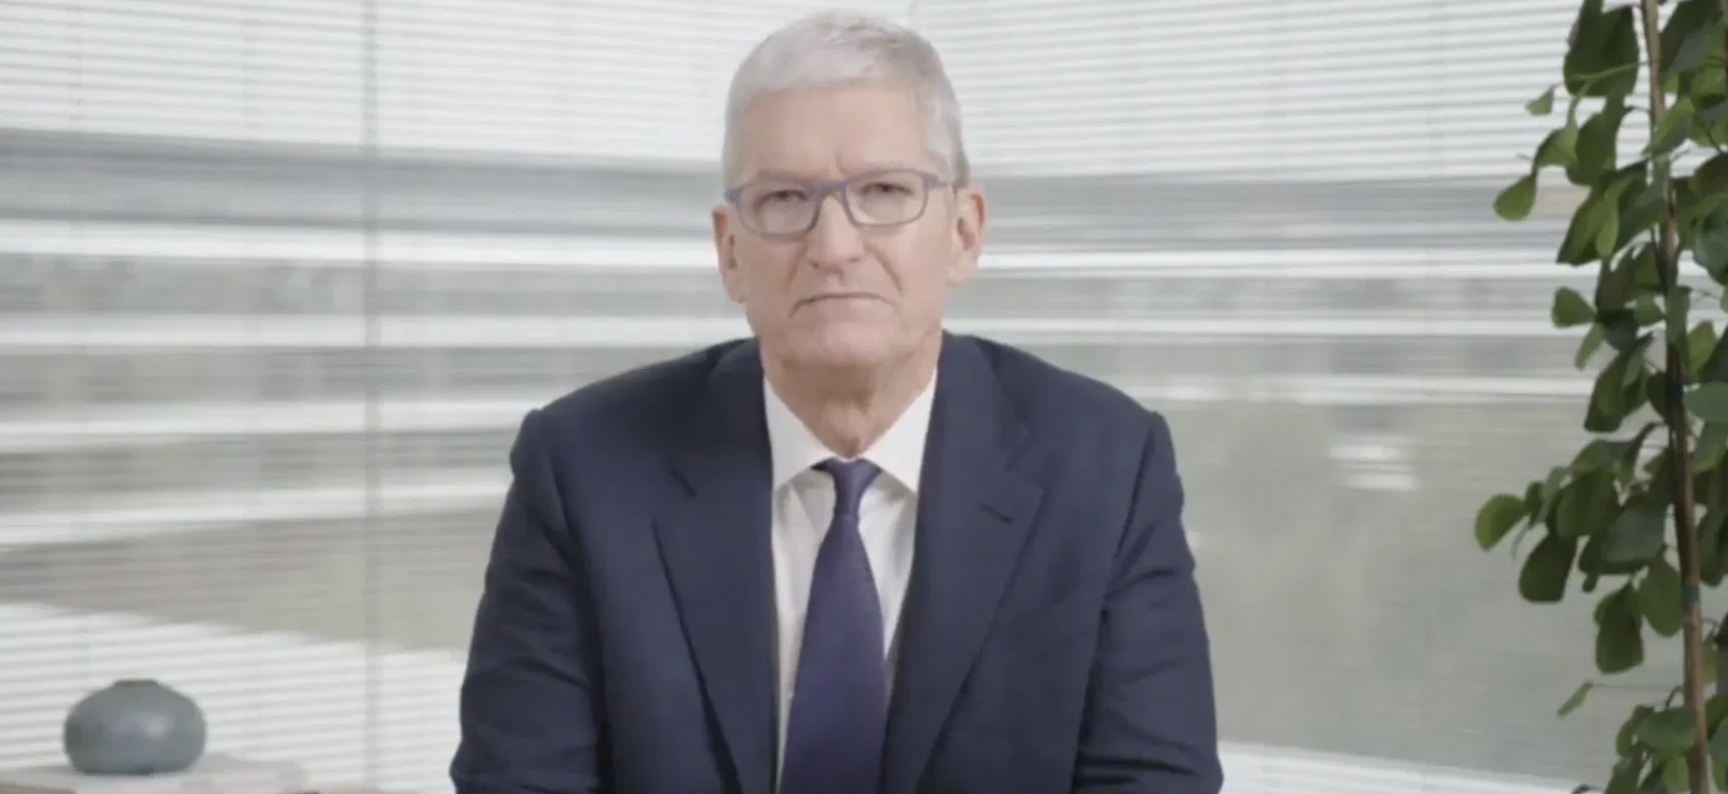 apple tim cook angry facebook